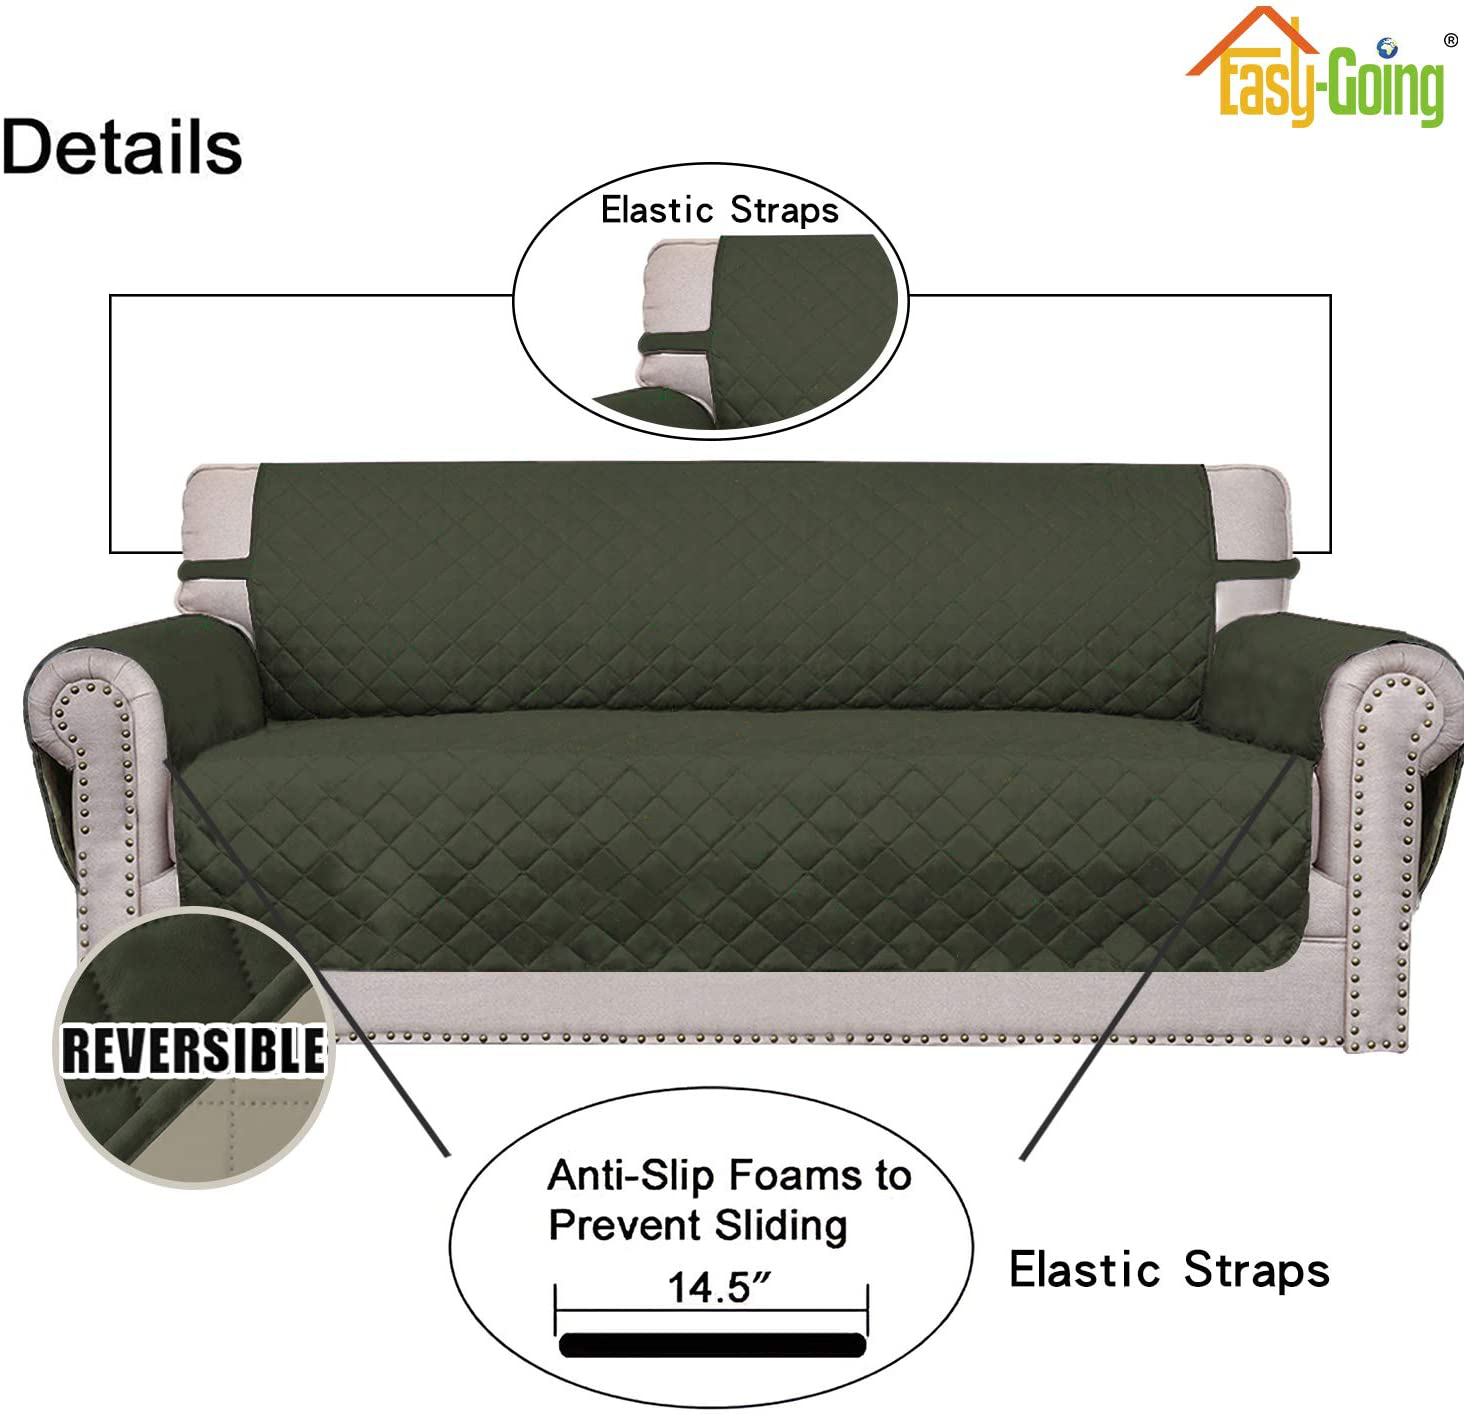 Easy-Going Sofa Slipcover Reversible Sofa Cover Water Resistant Couch Cover Furniture Protector with Elastic Straps for Pets Kids Children Dog Cat(Oversized Sofa, White/White)